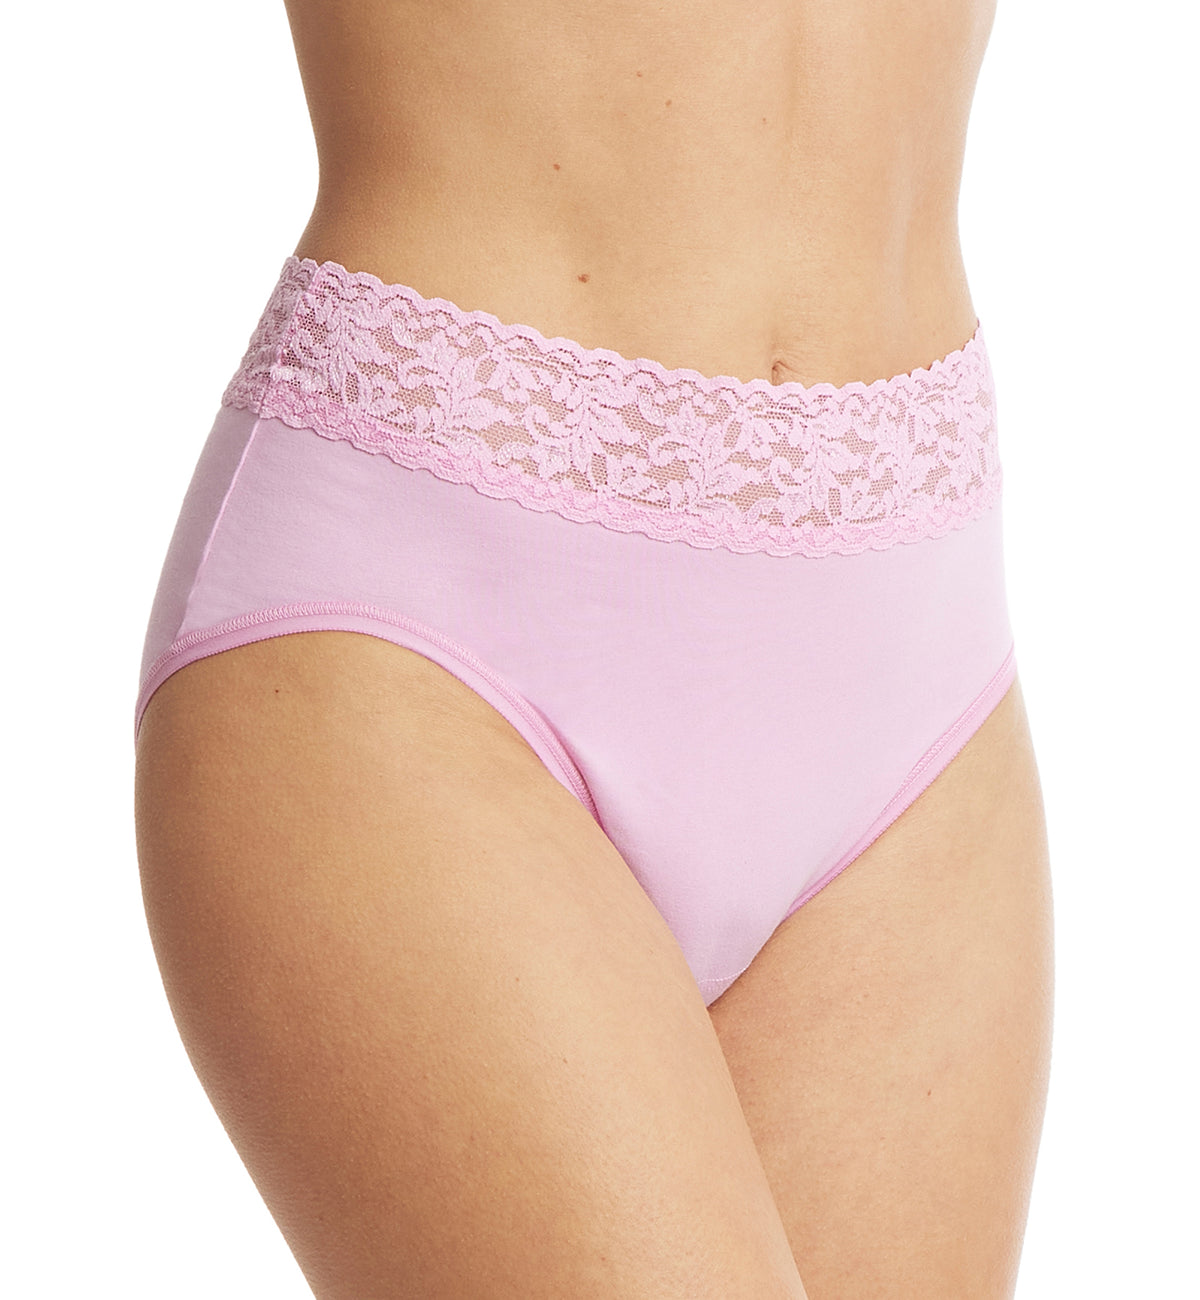 Hanky Panky Cotton French Brief with Lace (892461),Small,Lotus Flower - Lotus Flower,Small